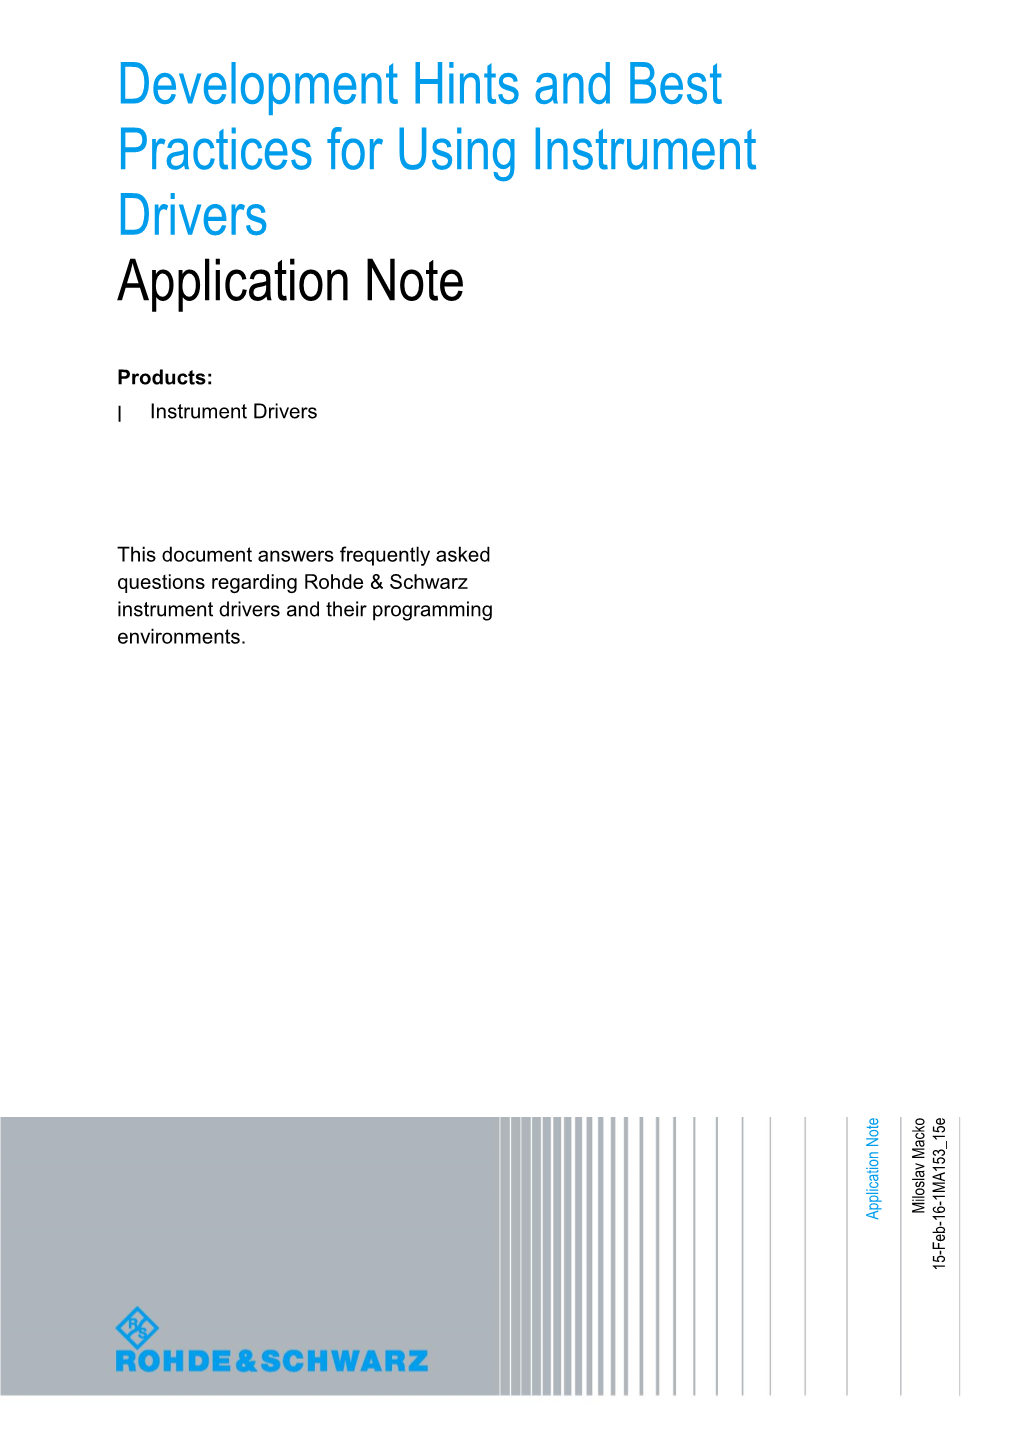 Development Hints and Best Practices for Using Instrument Drivers Application Note